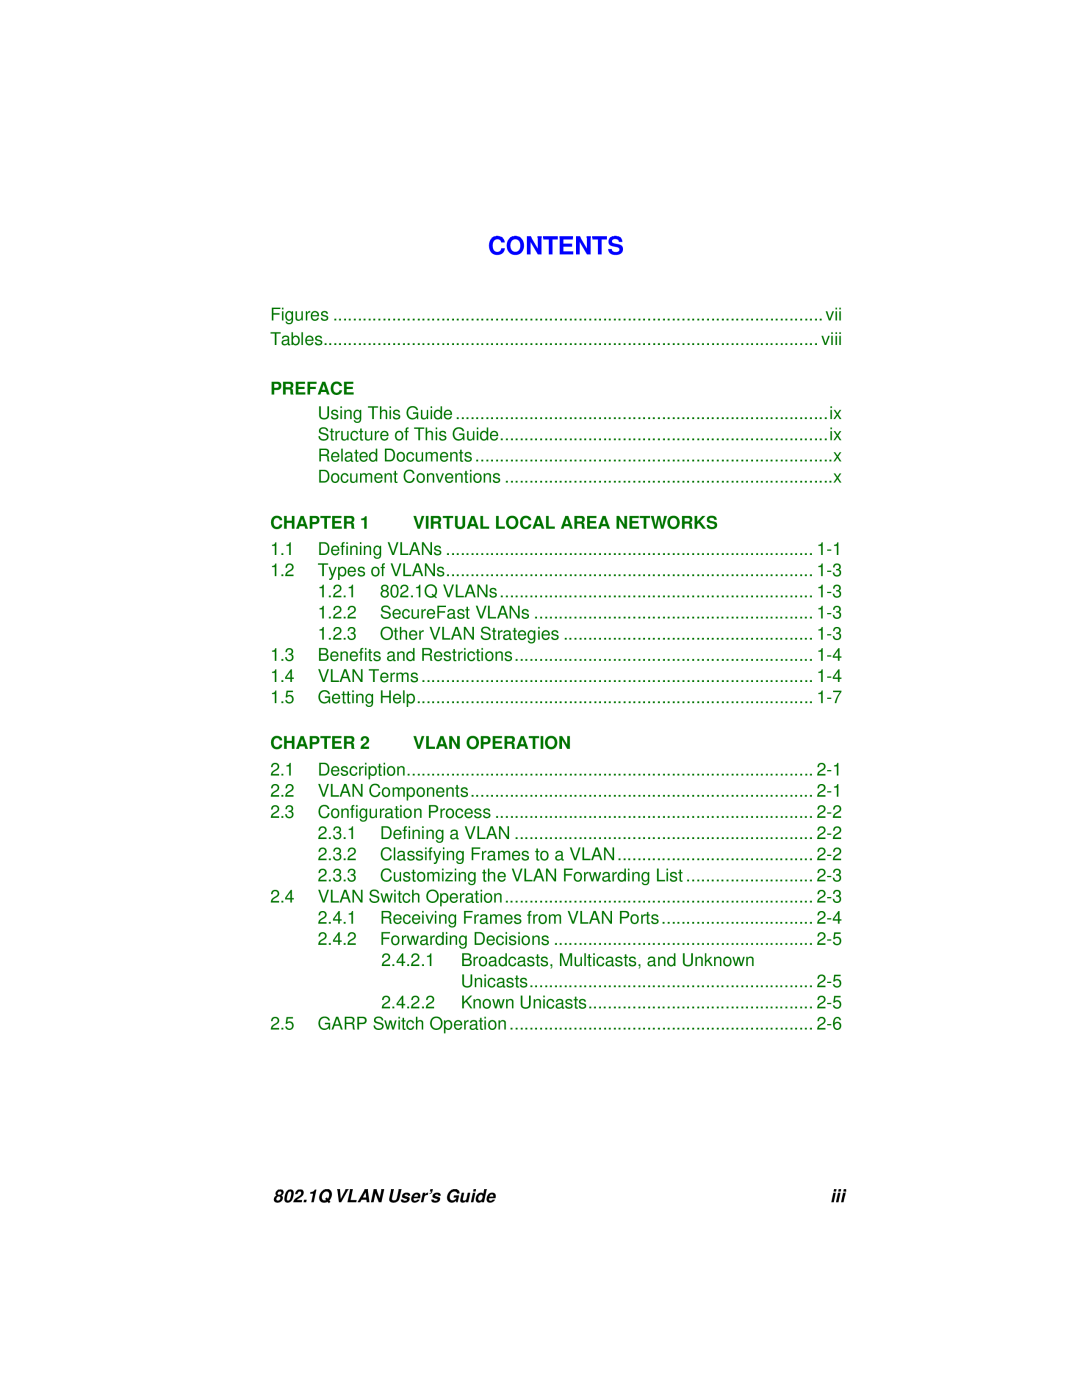 Cabletron Systems Contents, Preface, Chapter, Virtual Local Area Networks, Vlan Operation, 802.1Q VLAN User’s Guide 